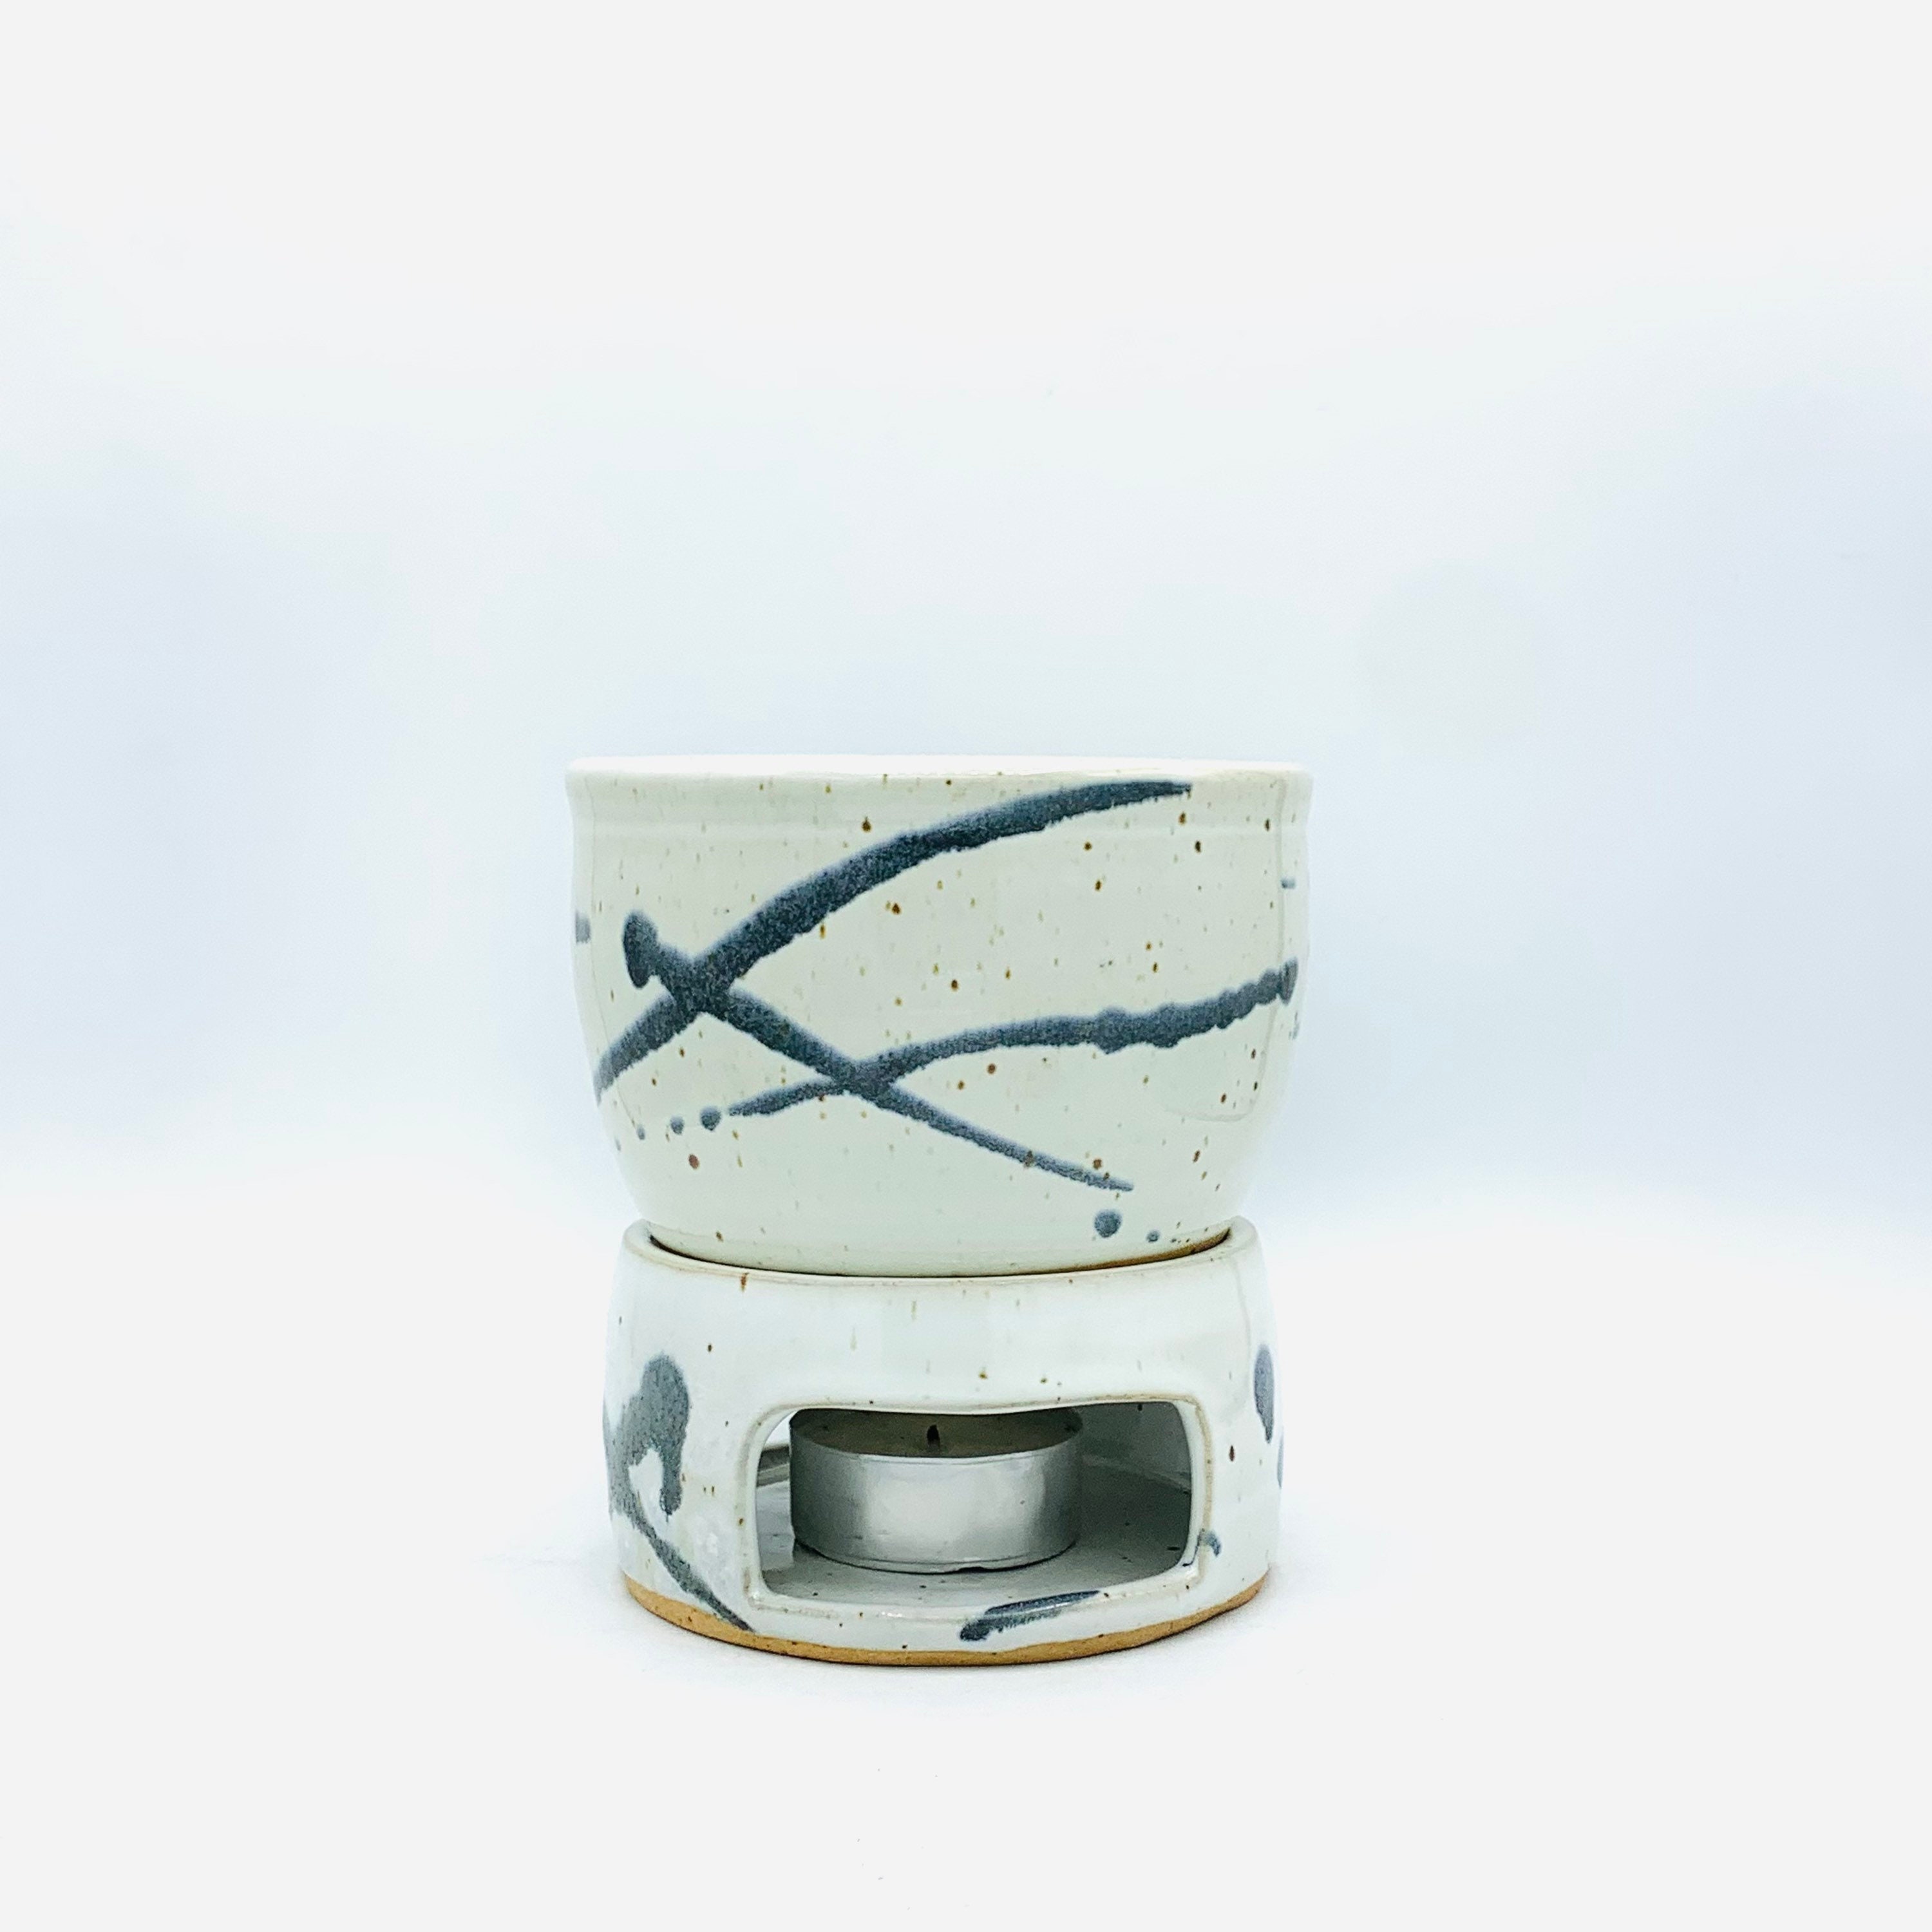 Made-to-Order Onyx River Ceramic Sake Warmer Base and Bowl Set by Amy Schnitzer